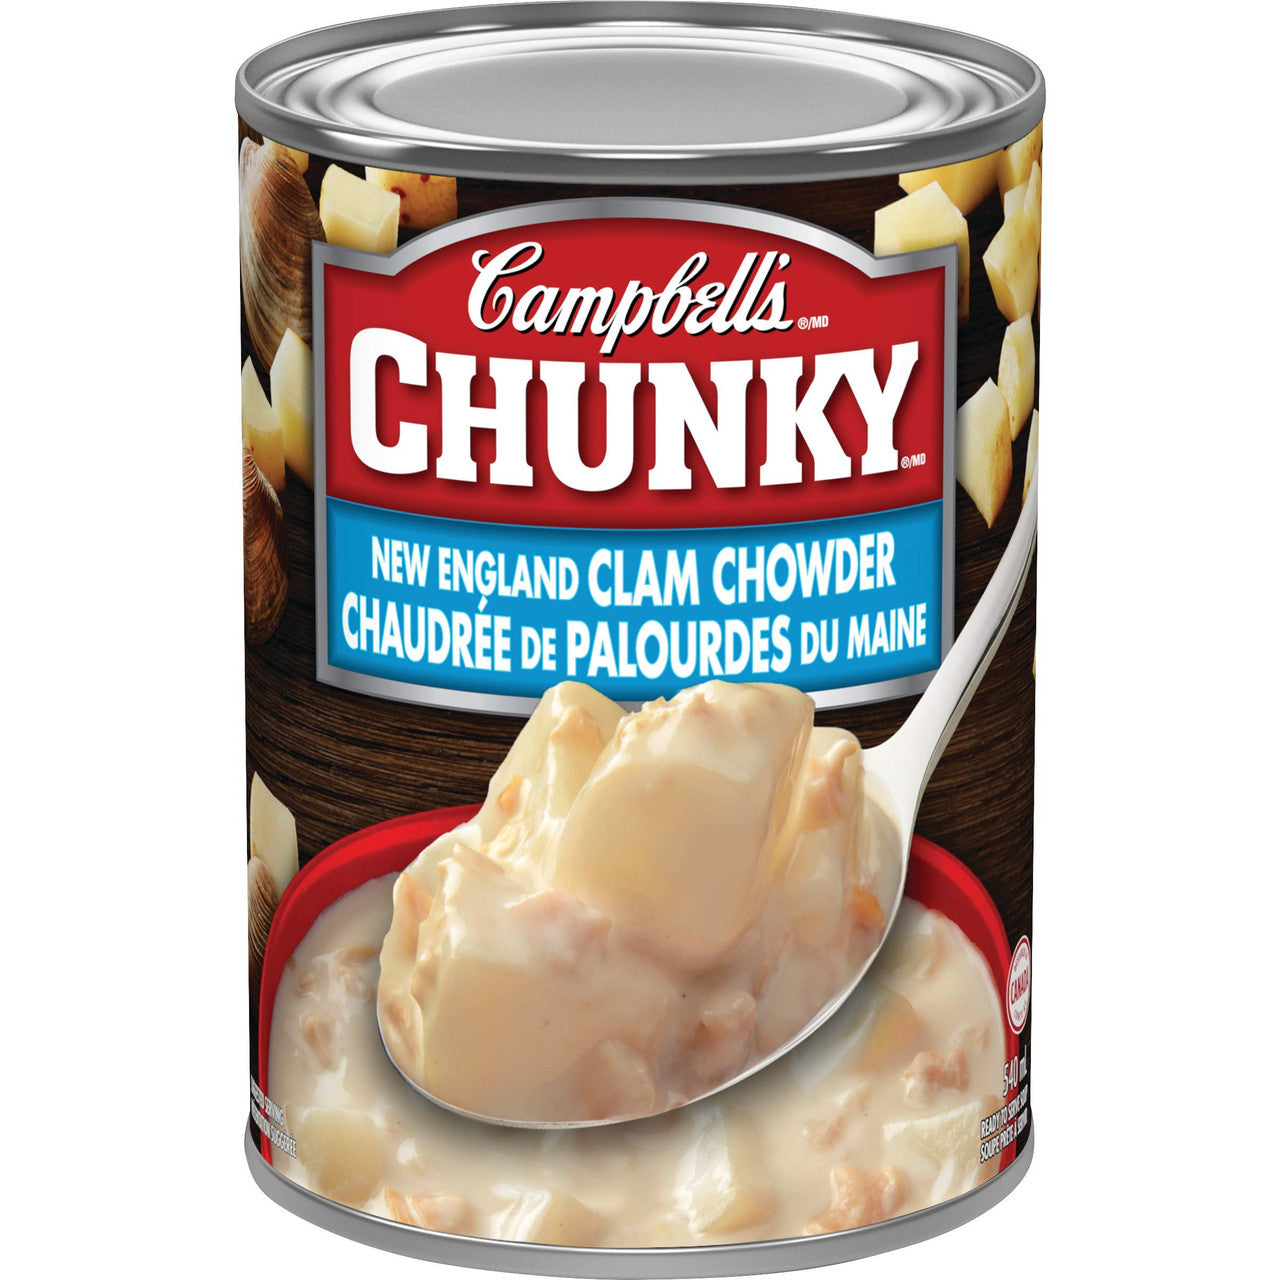 Campbell's Chunky New England Clam Chowder, 540ml/18.3 oz., (Canadian)